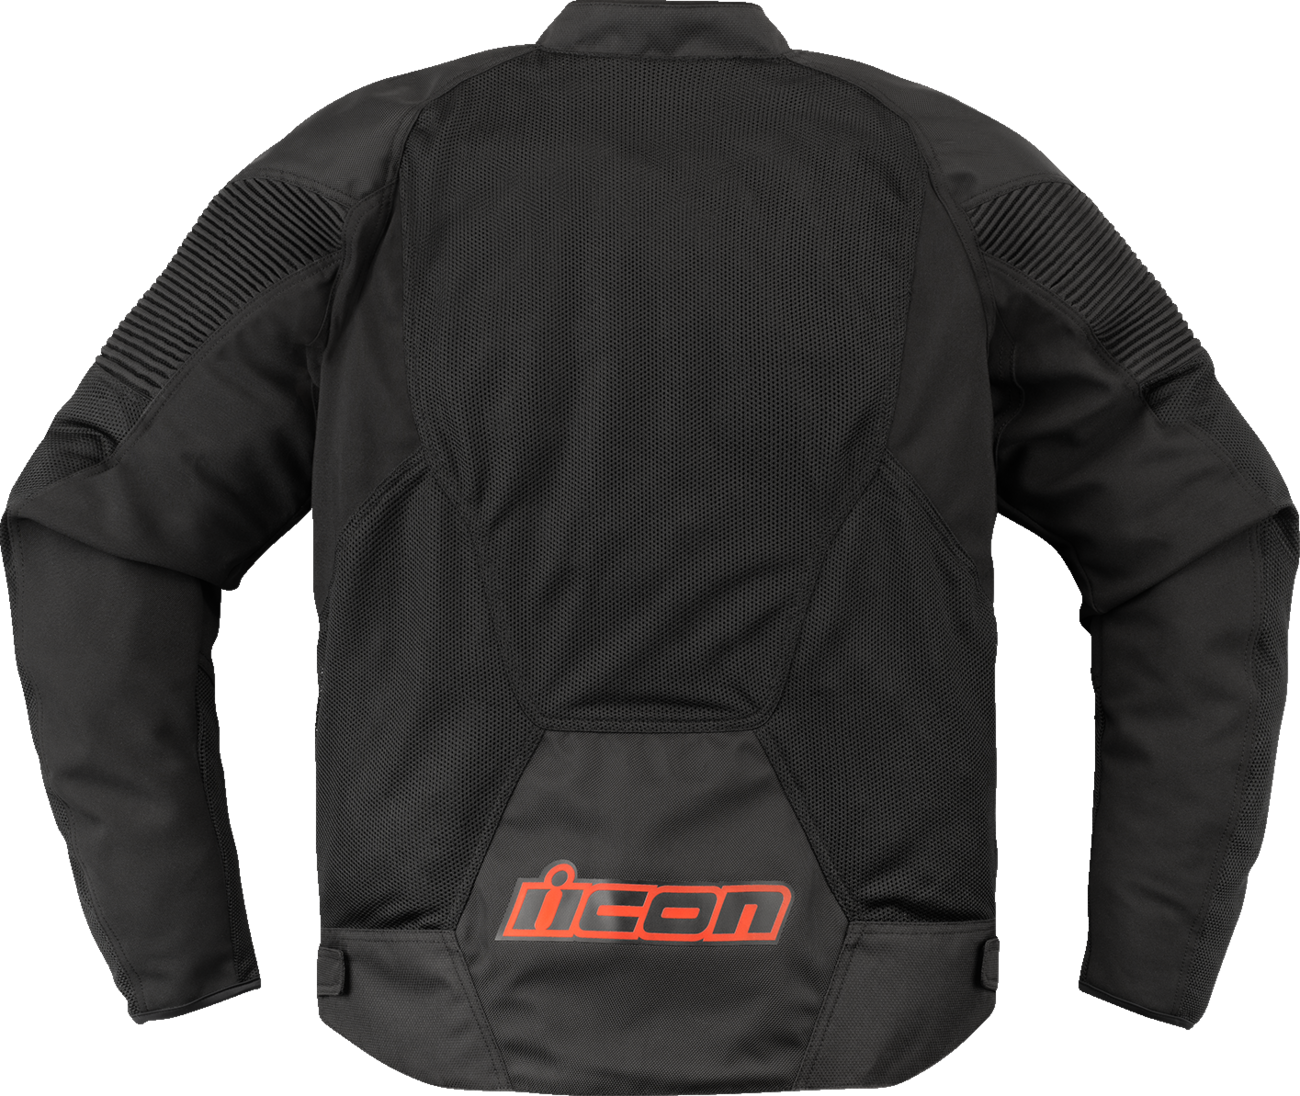 ICON Overlord3 Mesh™ CE Jacket - Slayer - 2XL 2820-6746